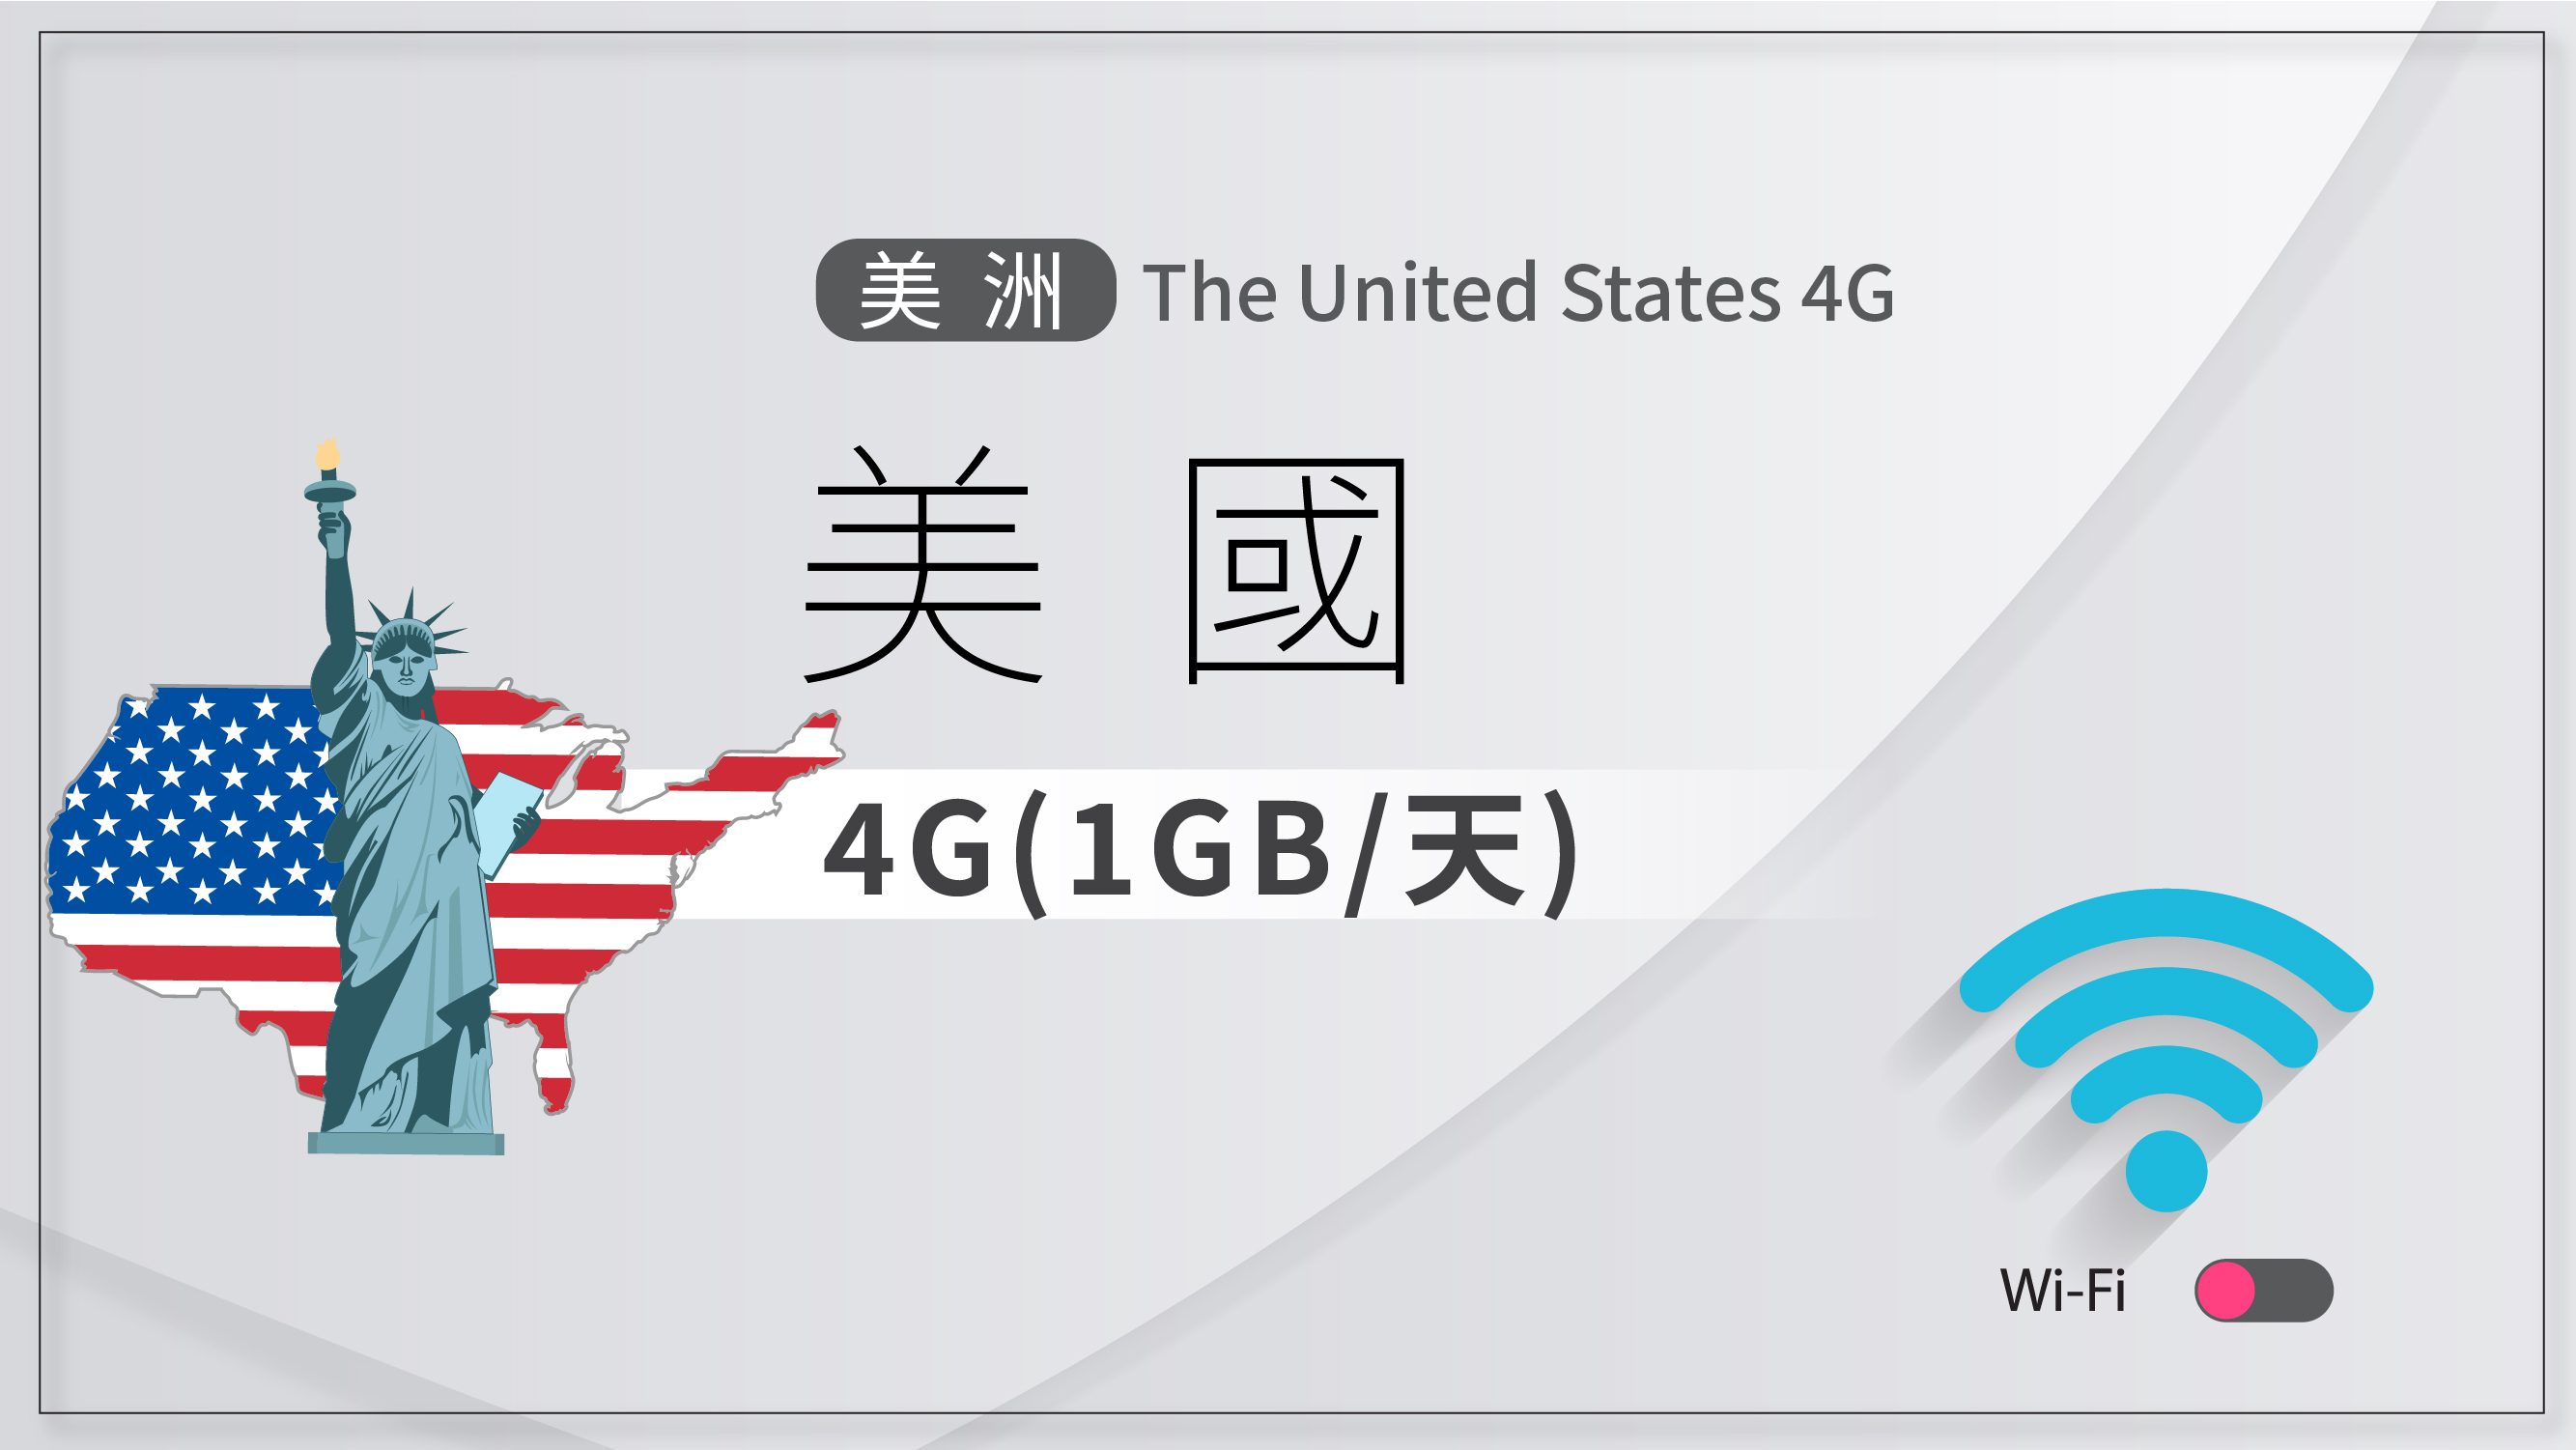 NEXT WIFI_The United States 4G